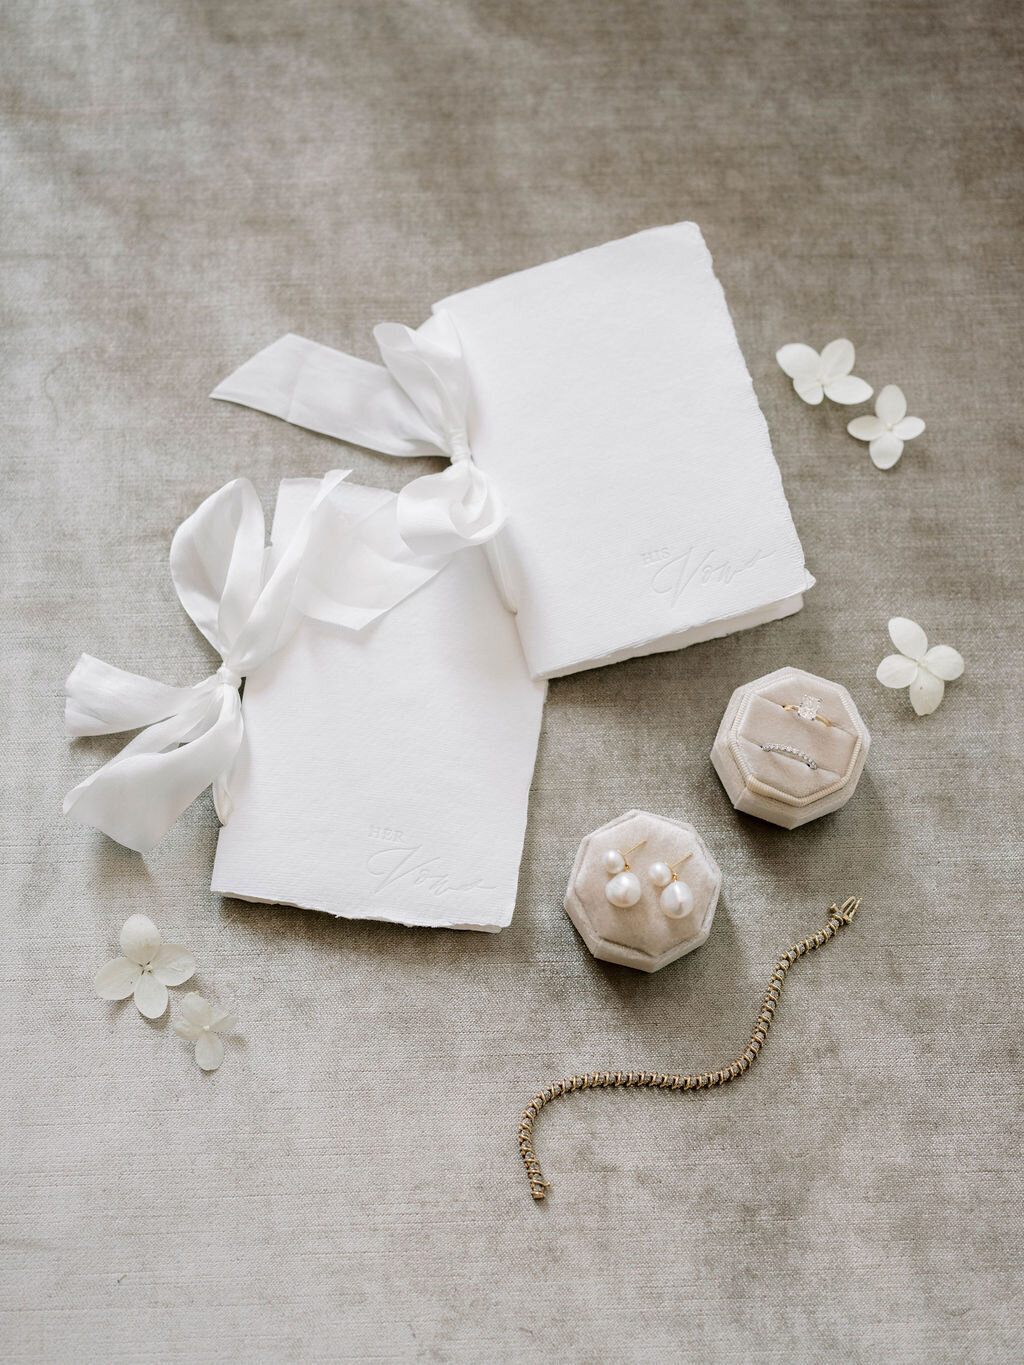 Flat lay of vows, jewelry, and small white petals.